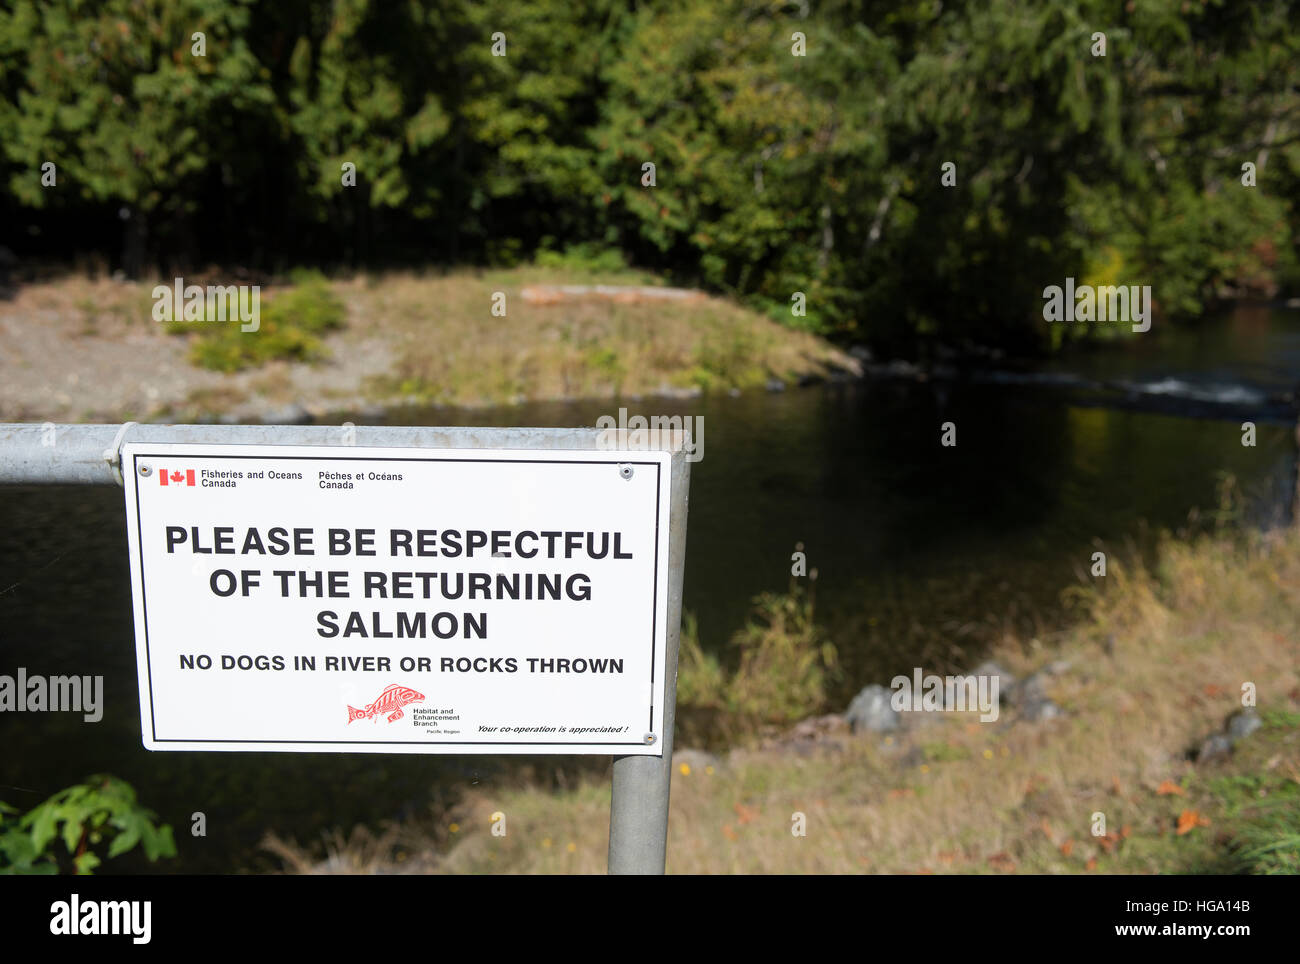 Big Qualicum River notice to care for migrating salmon and its River environment. SCO 11,363. Stock Photo